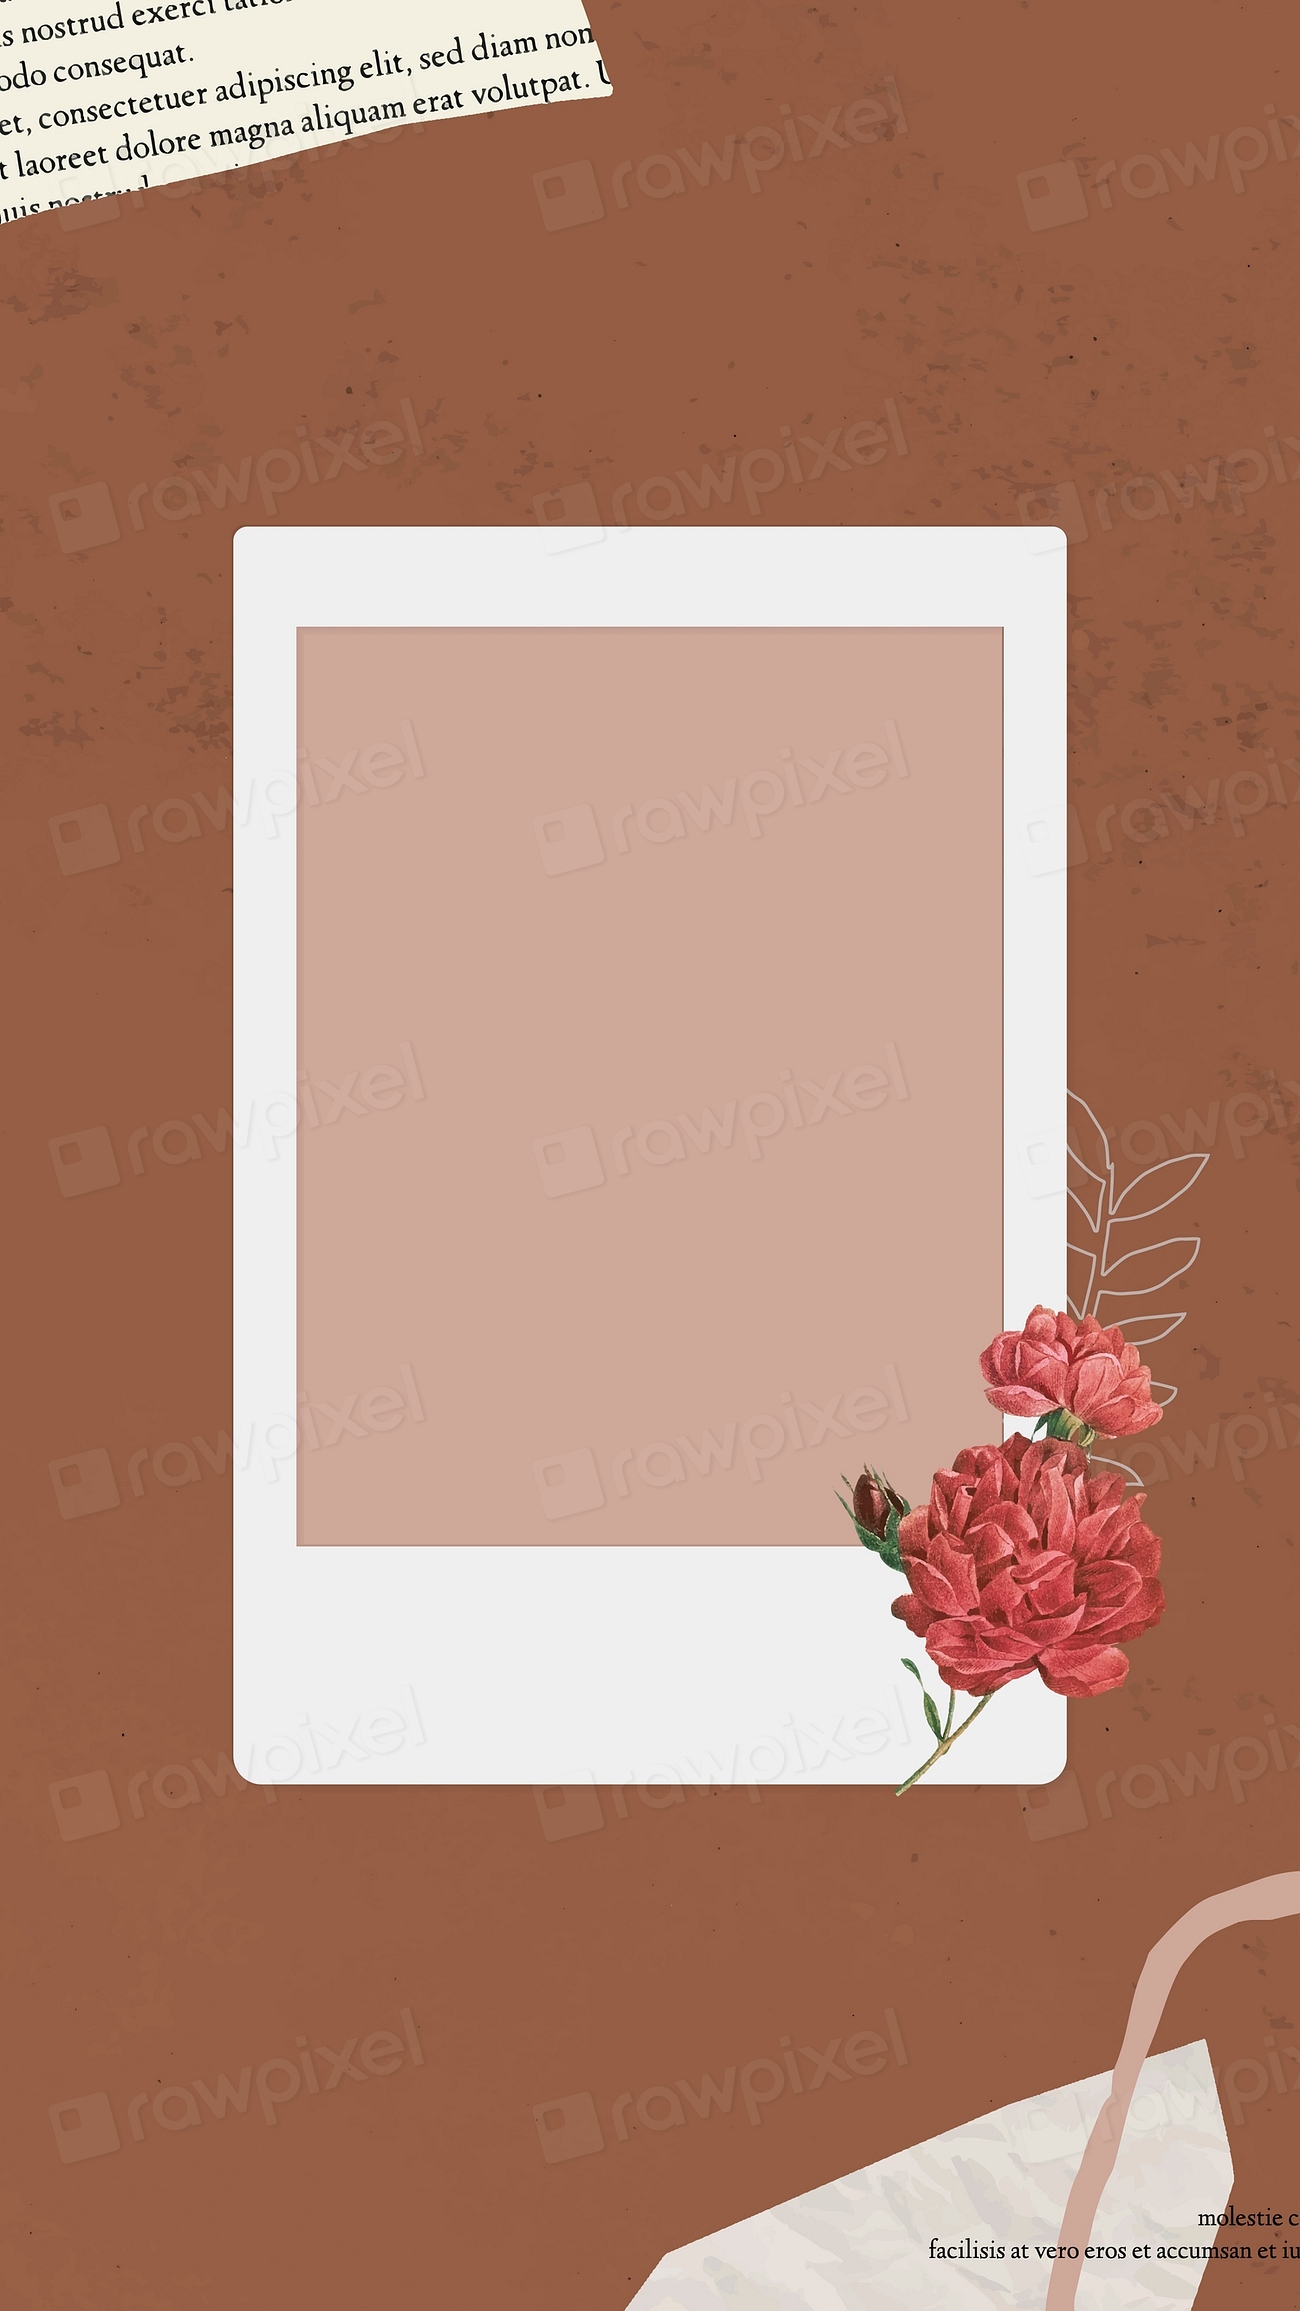 Blank collage photo frame template | Premium Vector - rawpixel